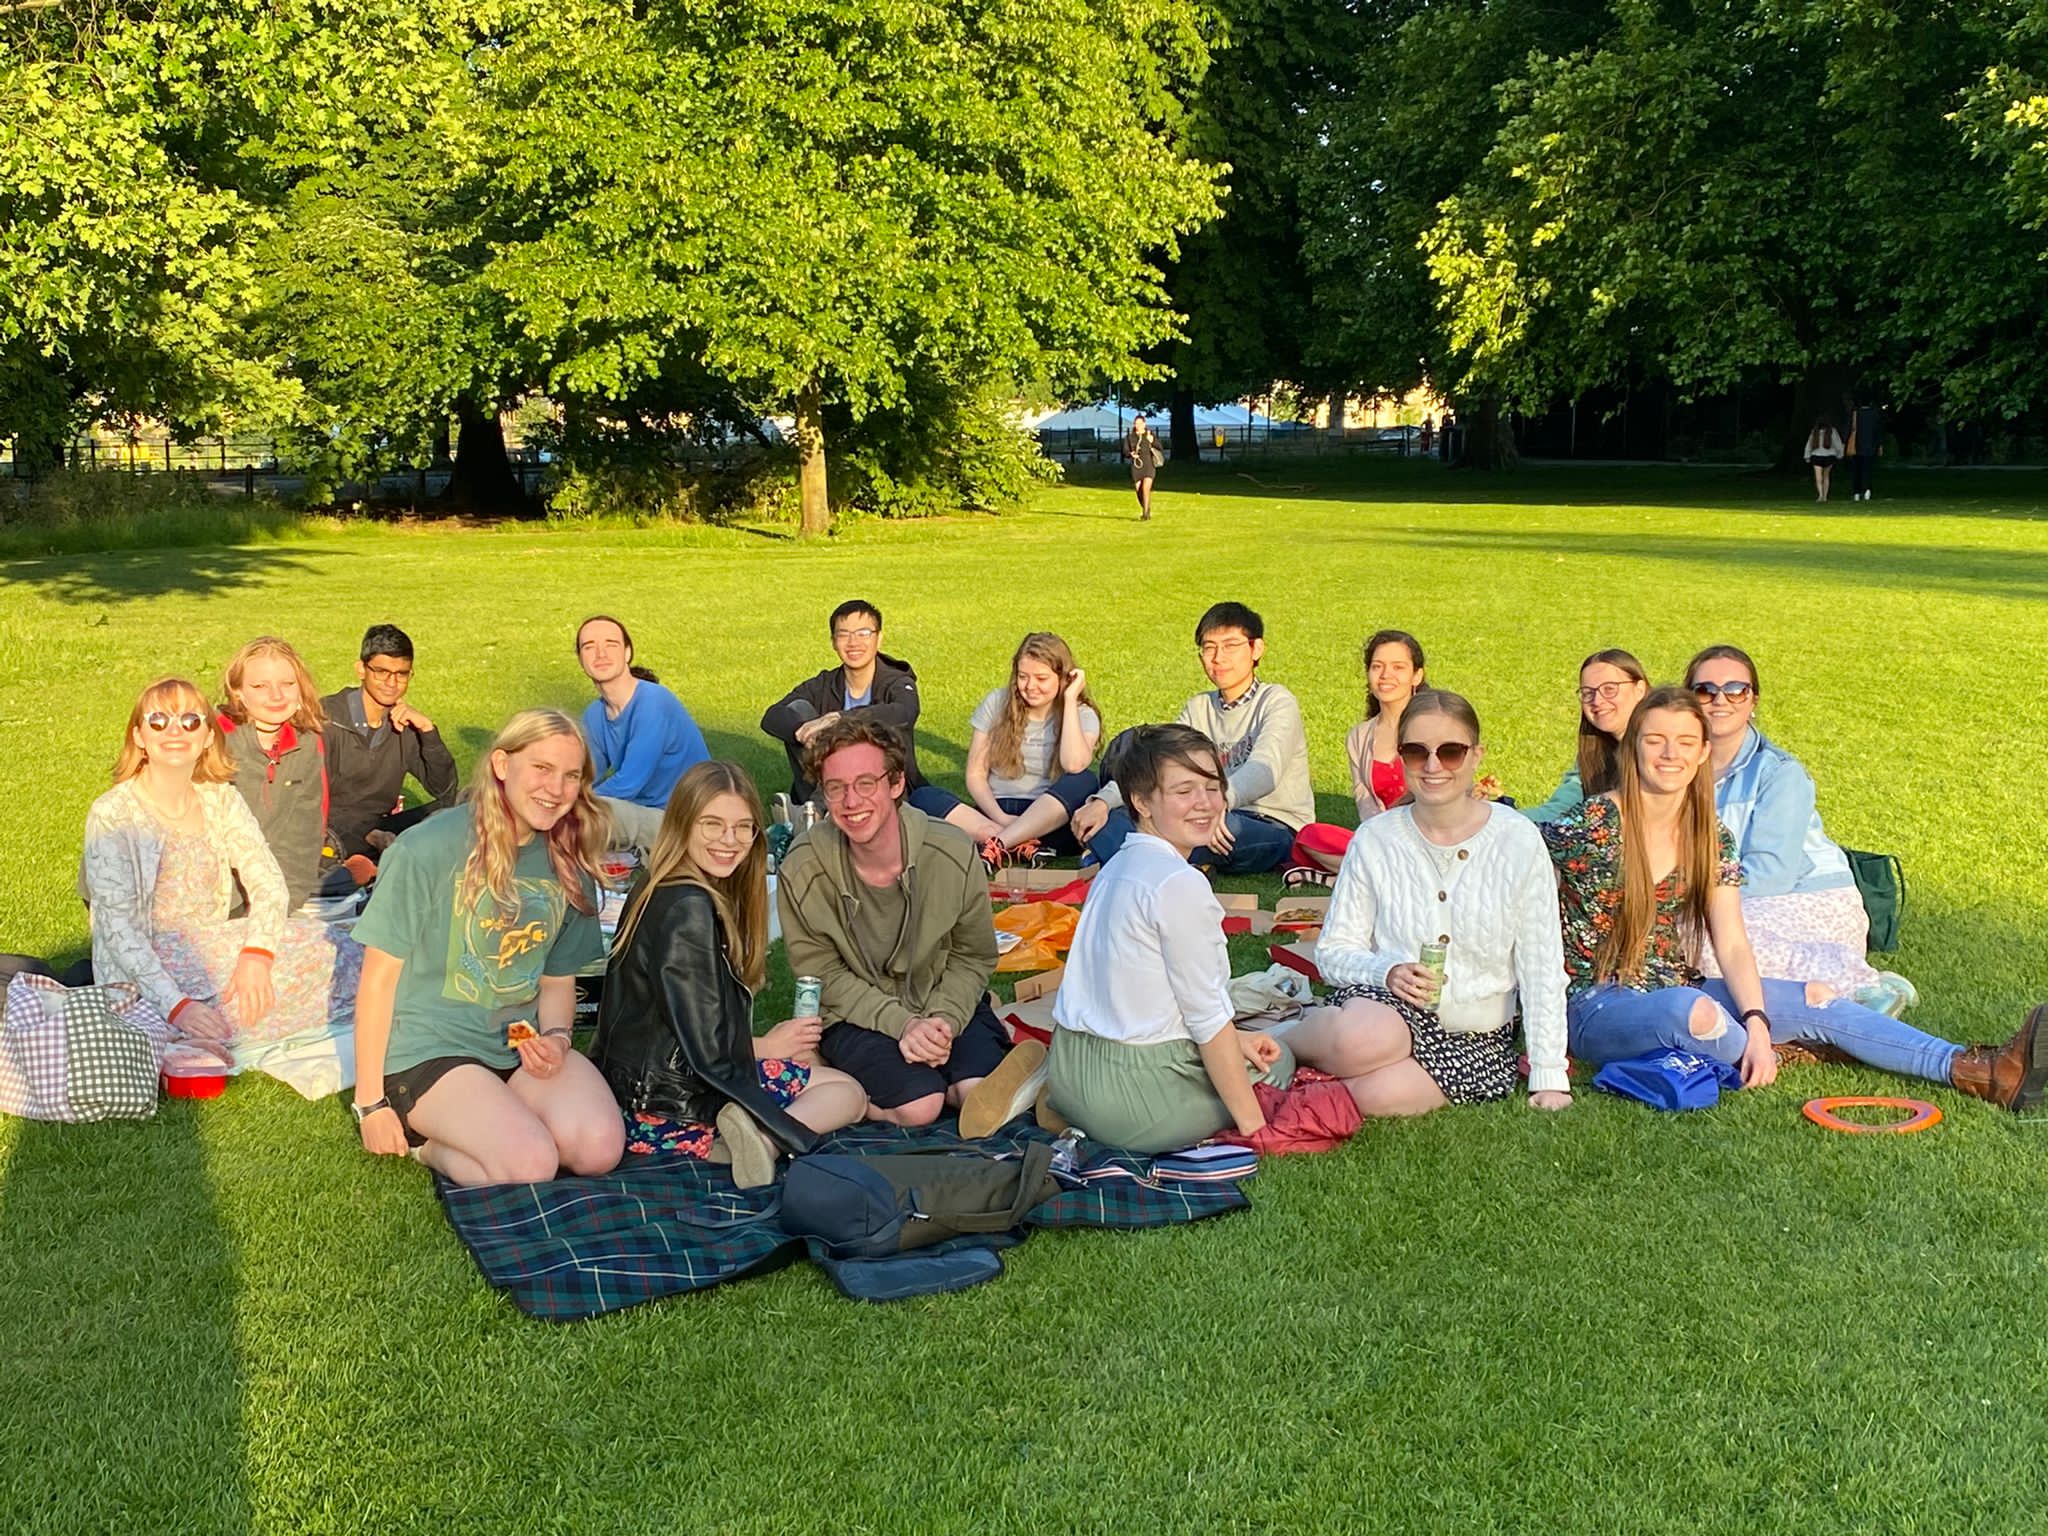 A group of friends having a picnic on the grass